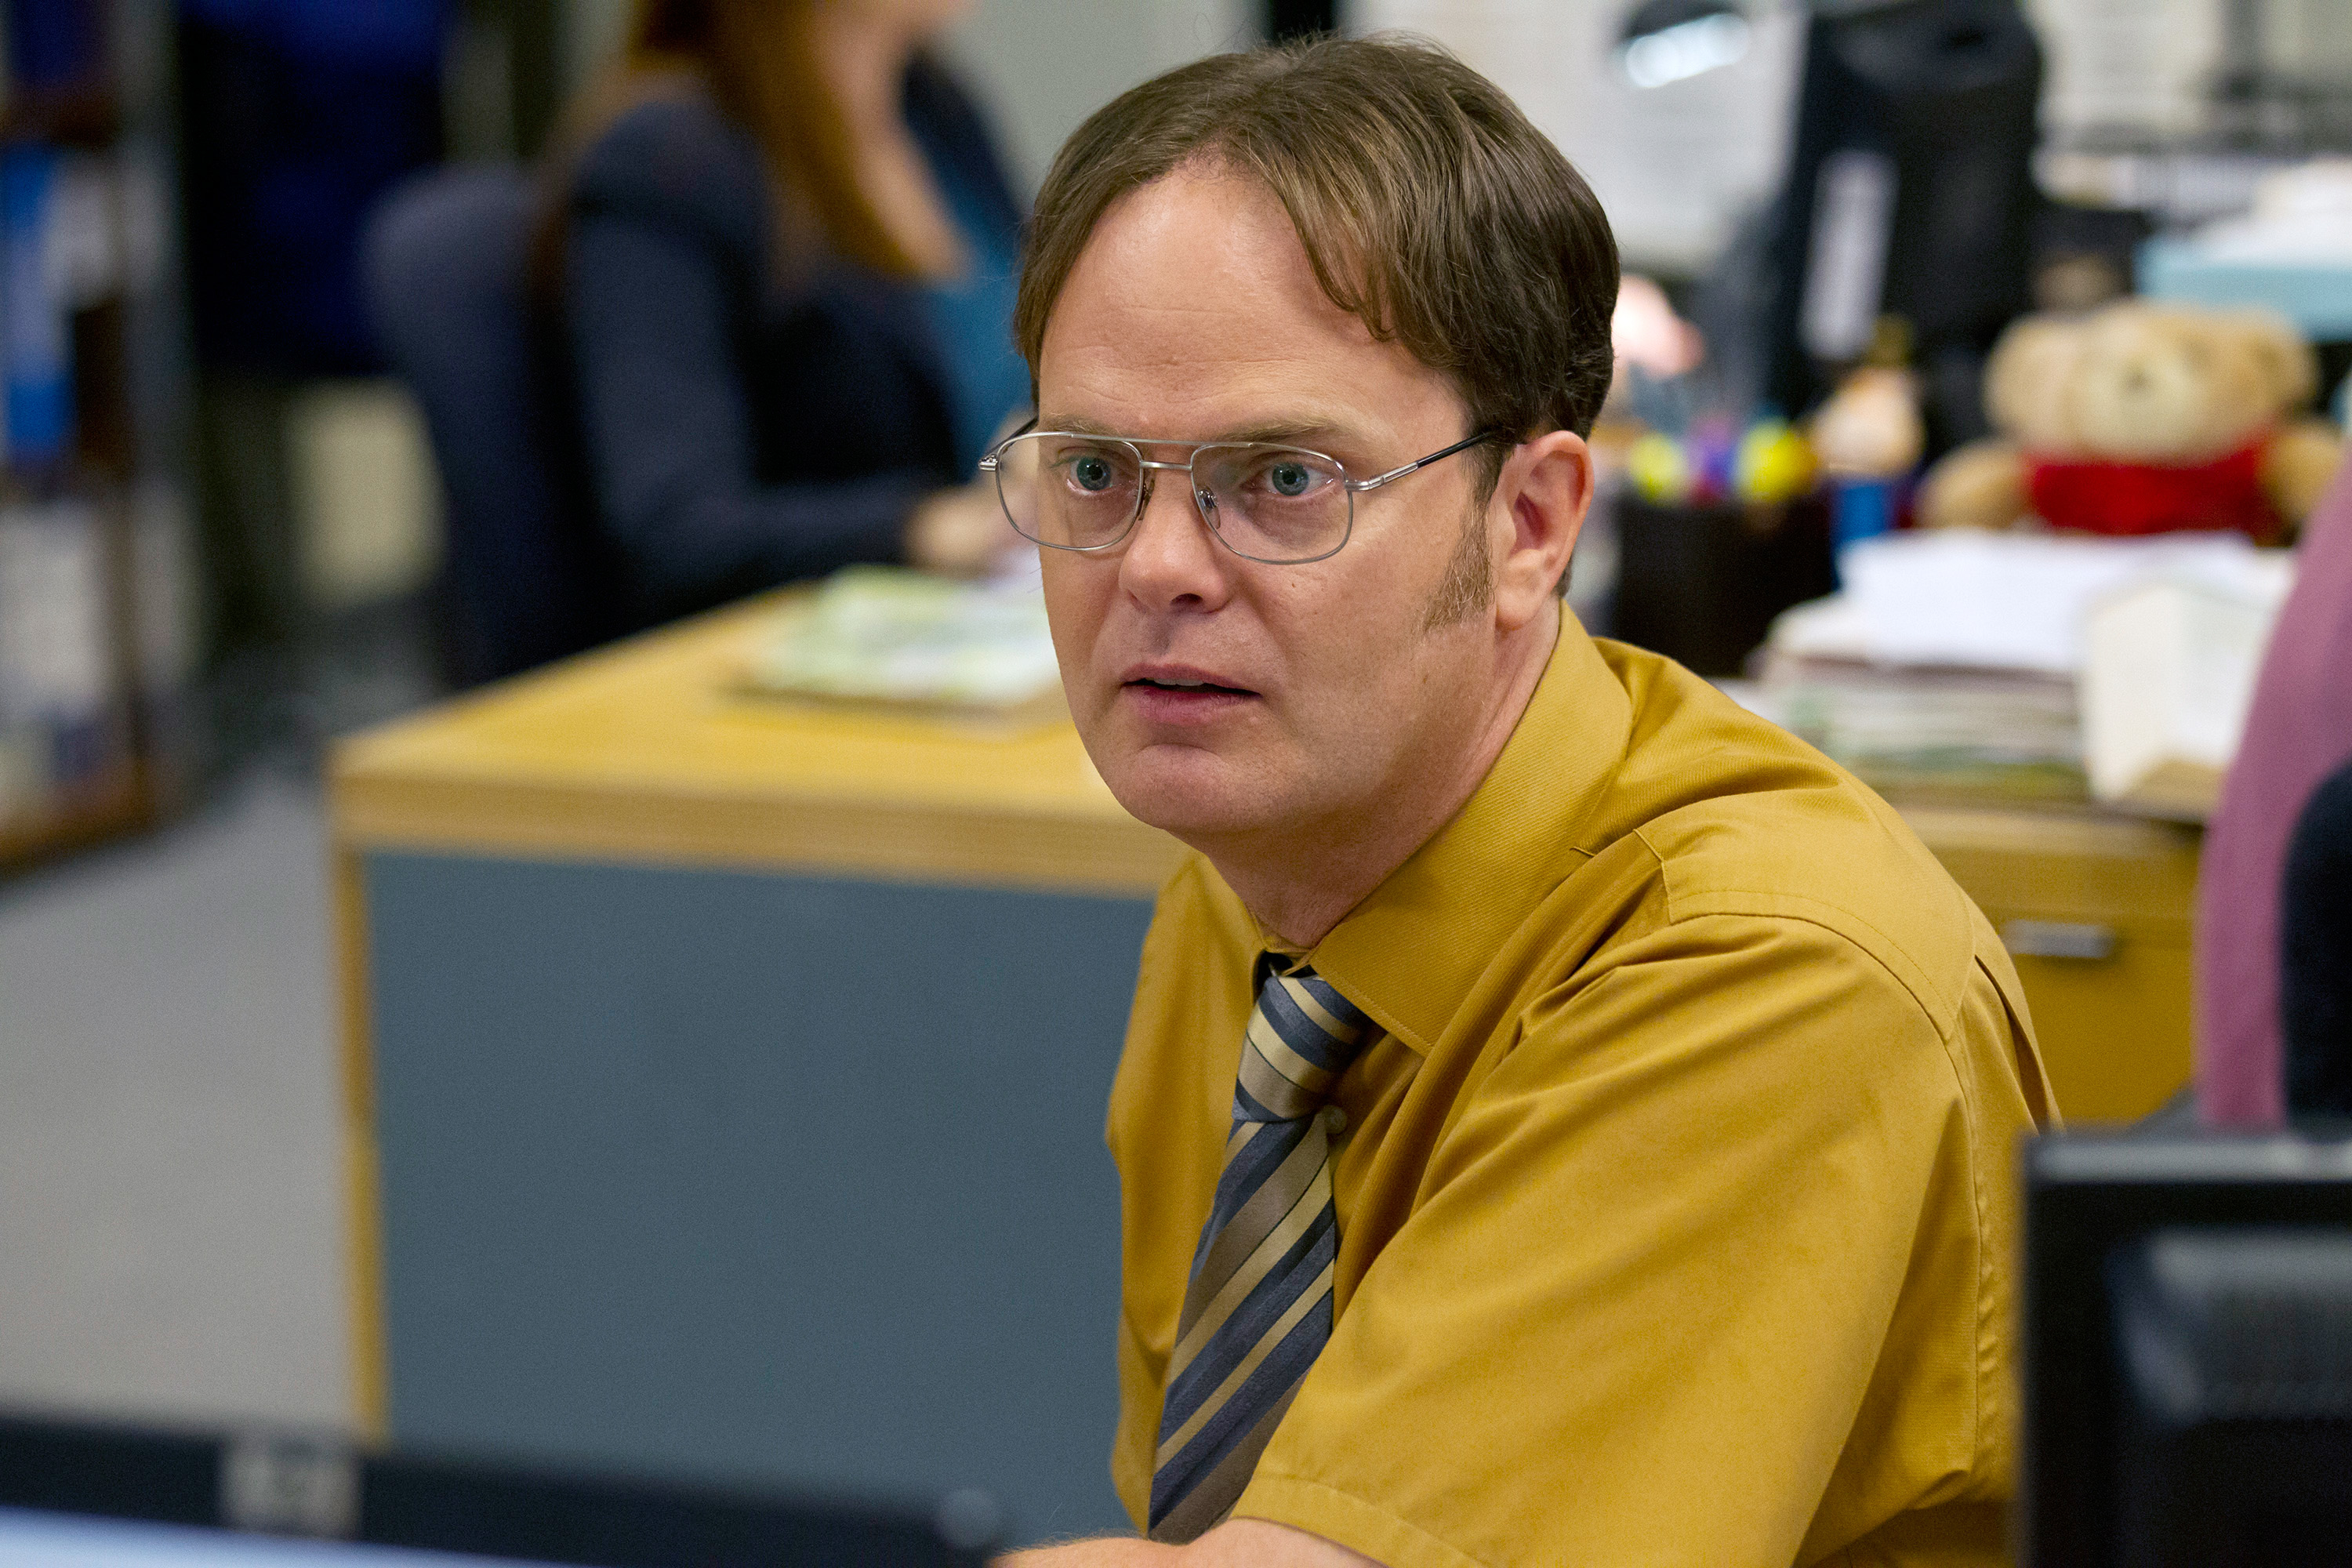 Dwight Schrute from The Office sitting at a desk with a focused expression, wearing a mustard shirt and striped tie